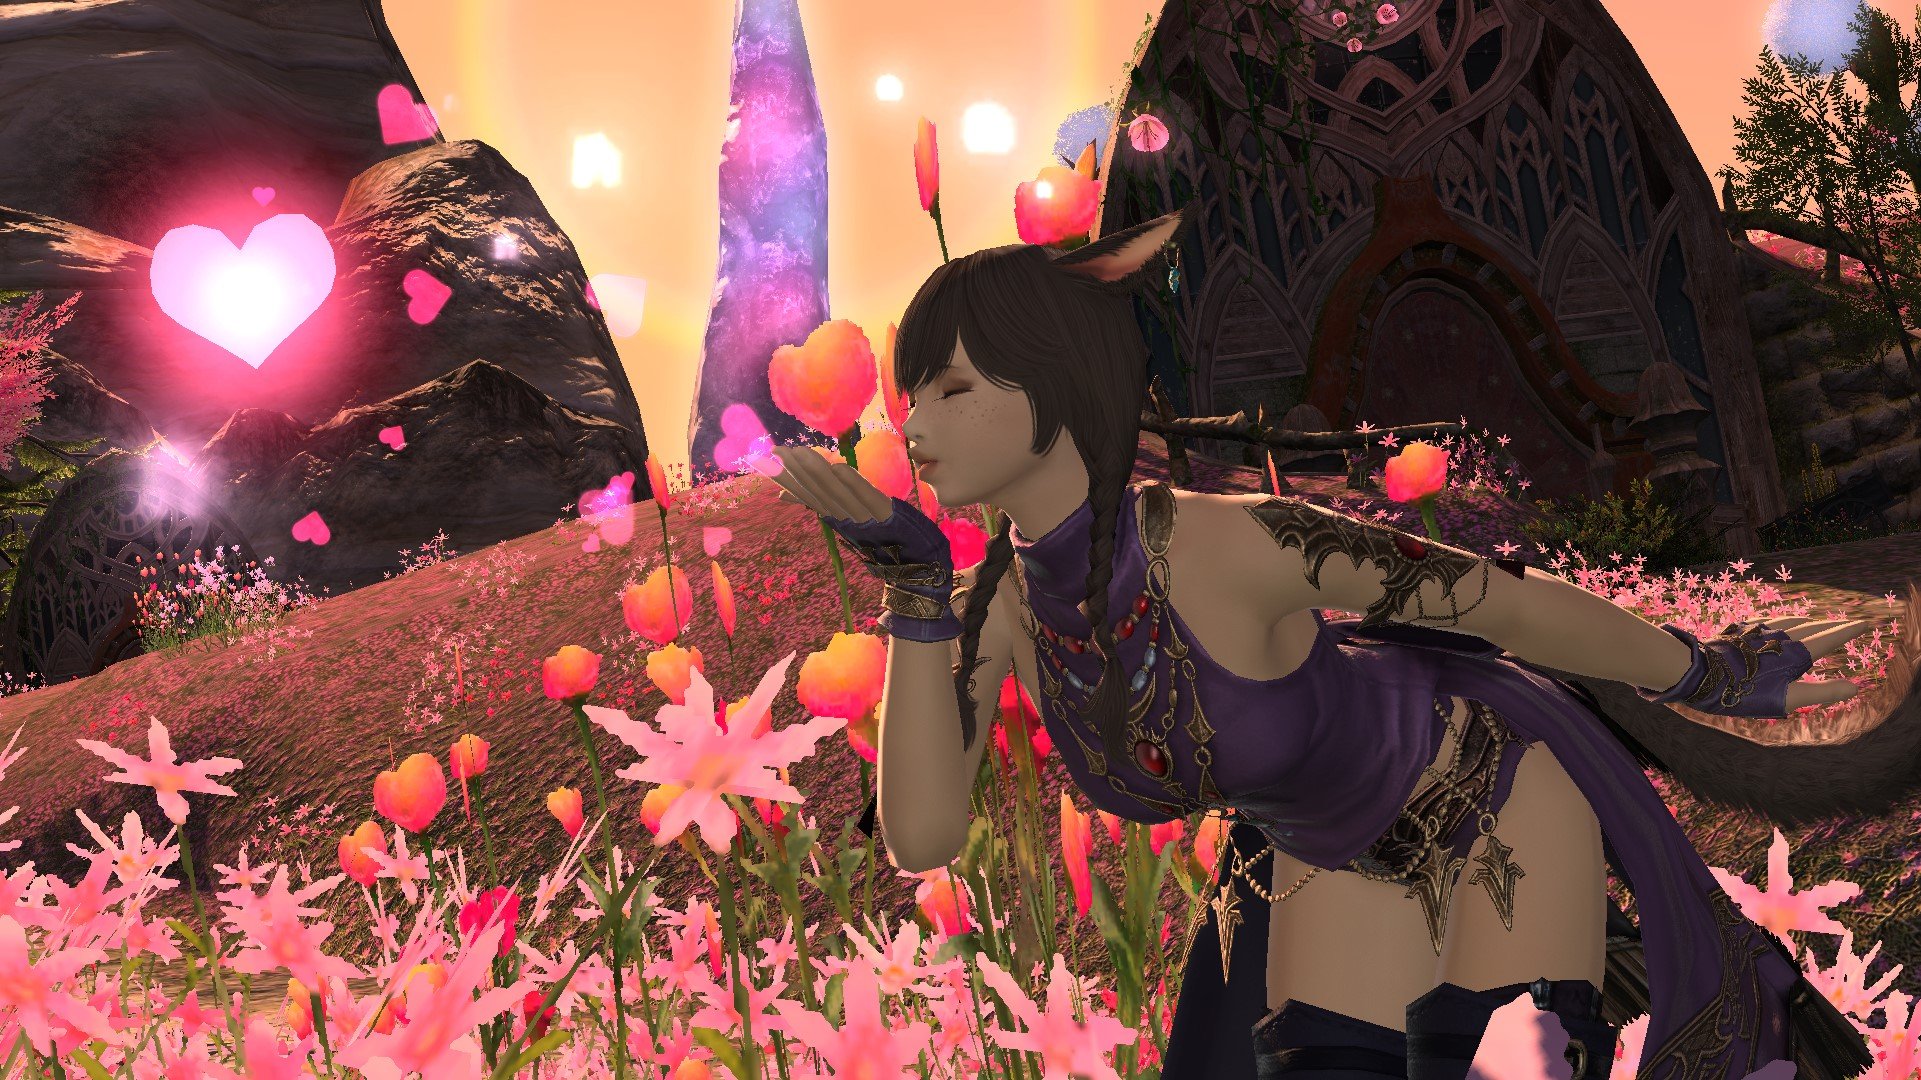 FFXIV Valentione's Day event returns with an adorable Love Heart emote